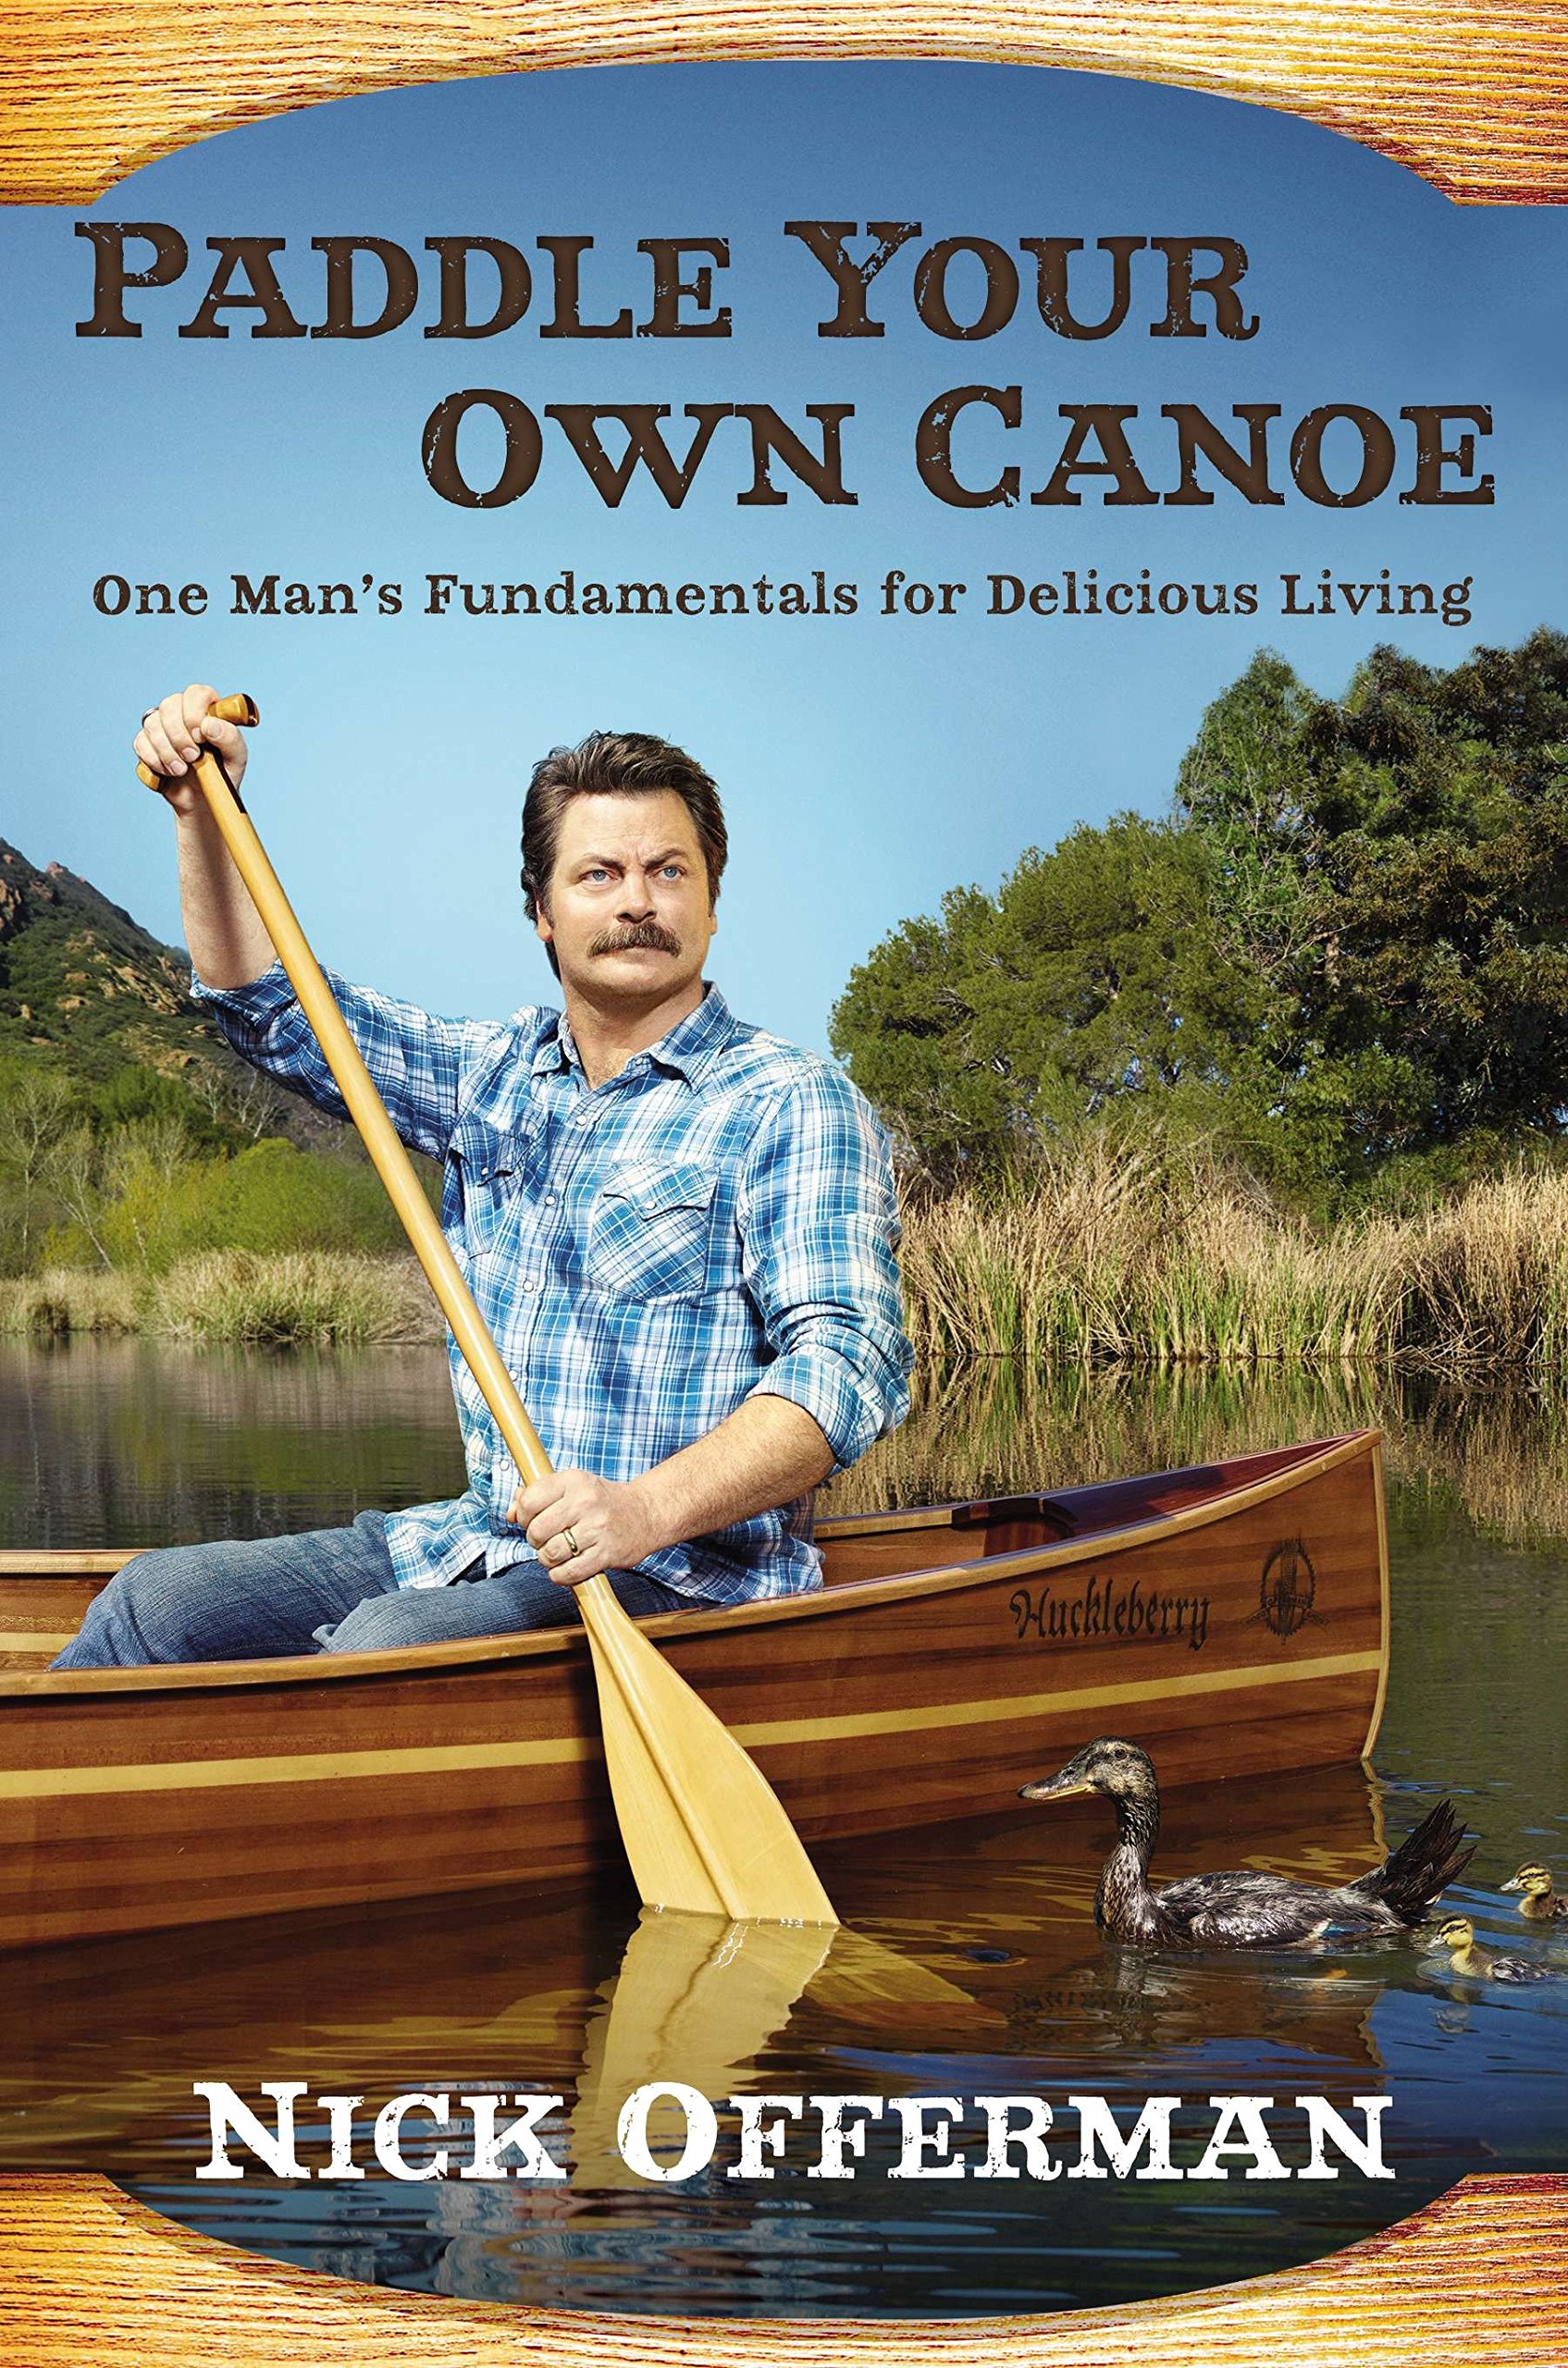 Cover of Paddle Your Own Canoe by Nick Offerman